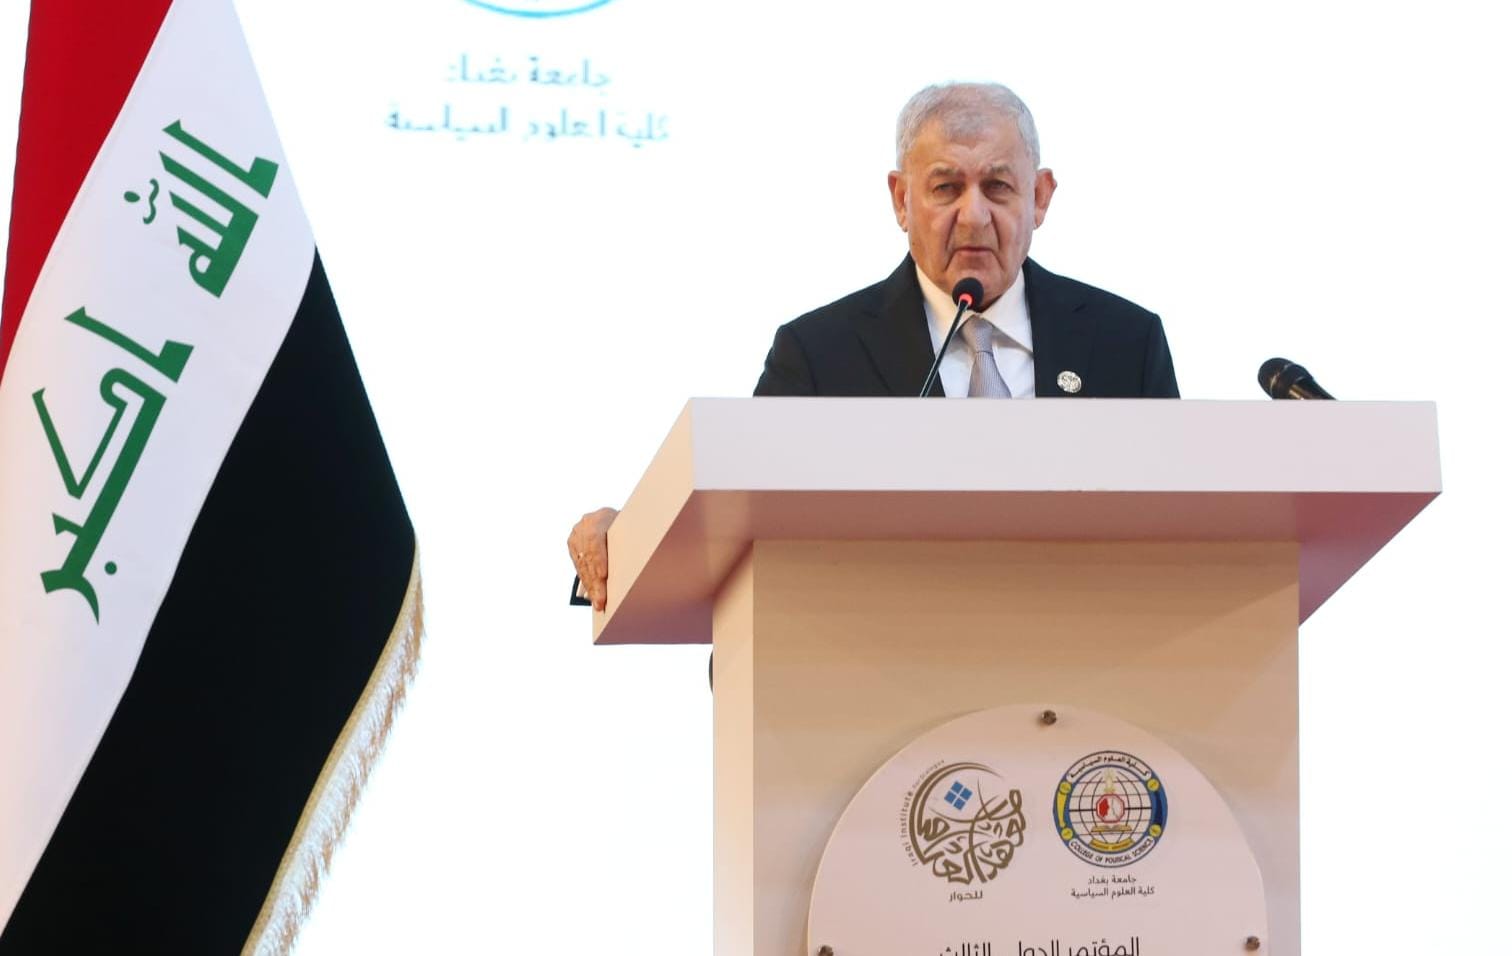 Iraq's President advocates climate action to protect water resources and food security.